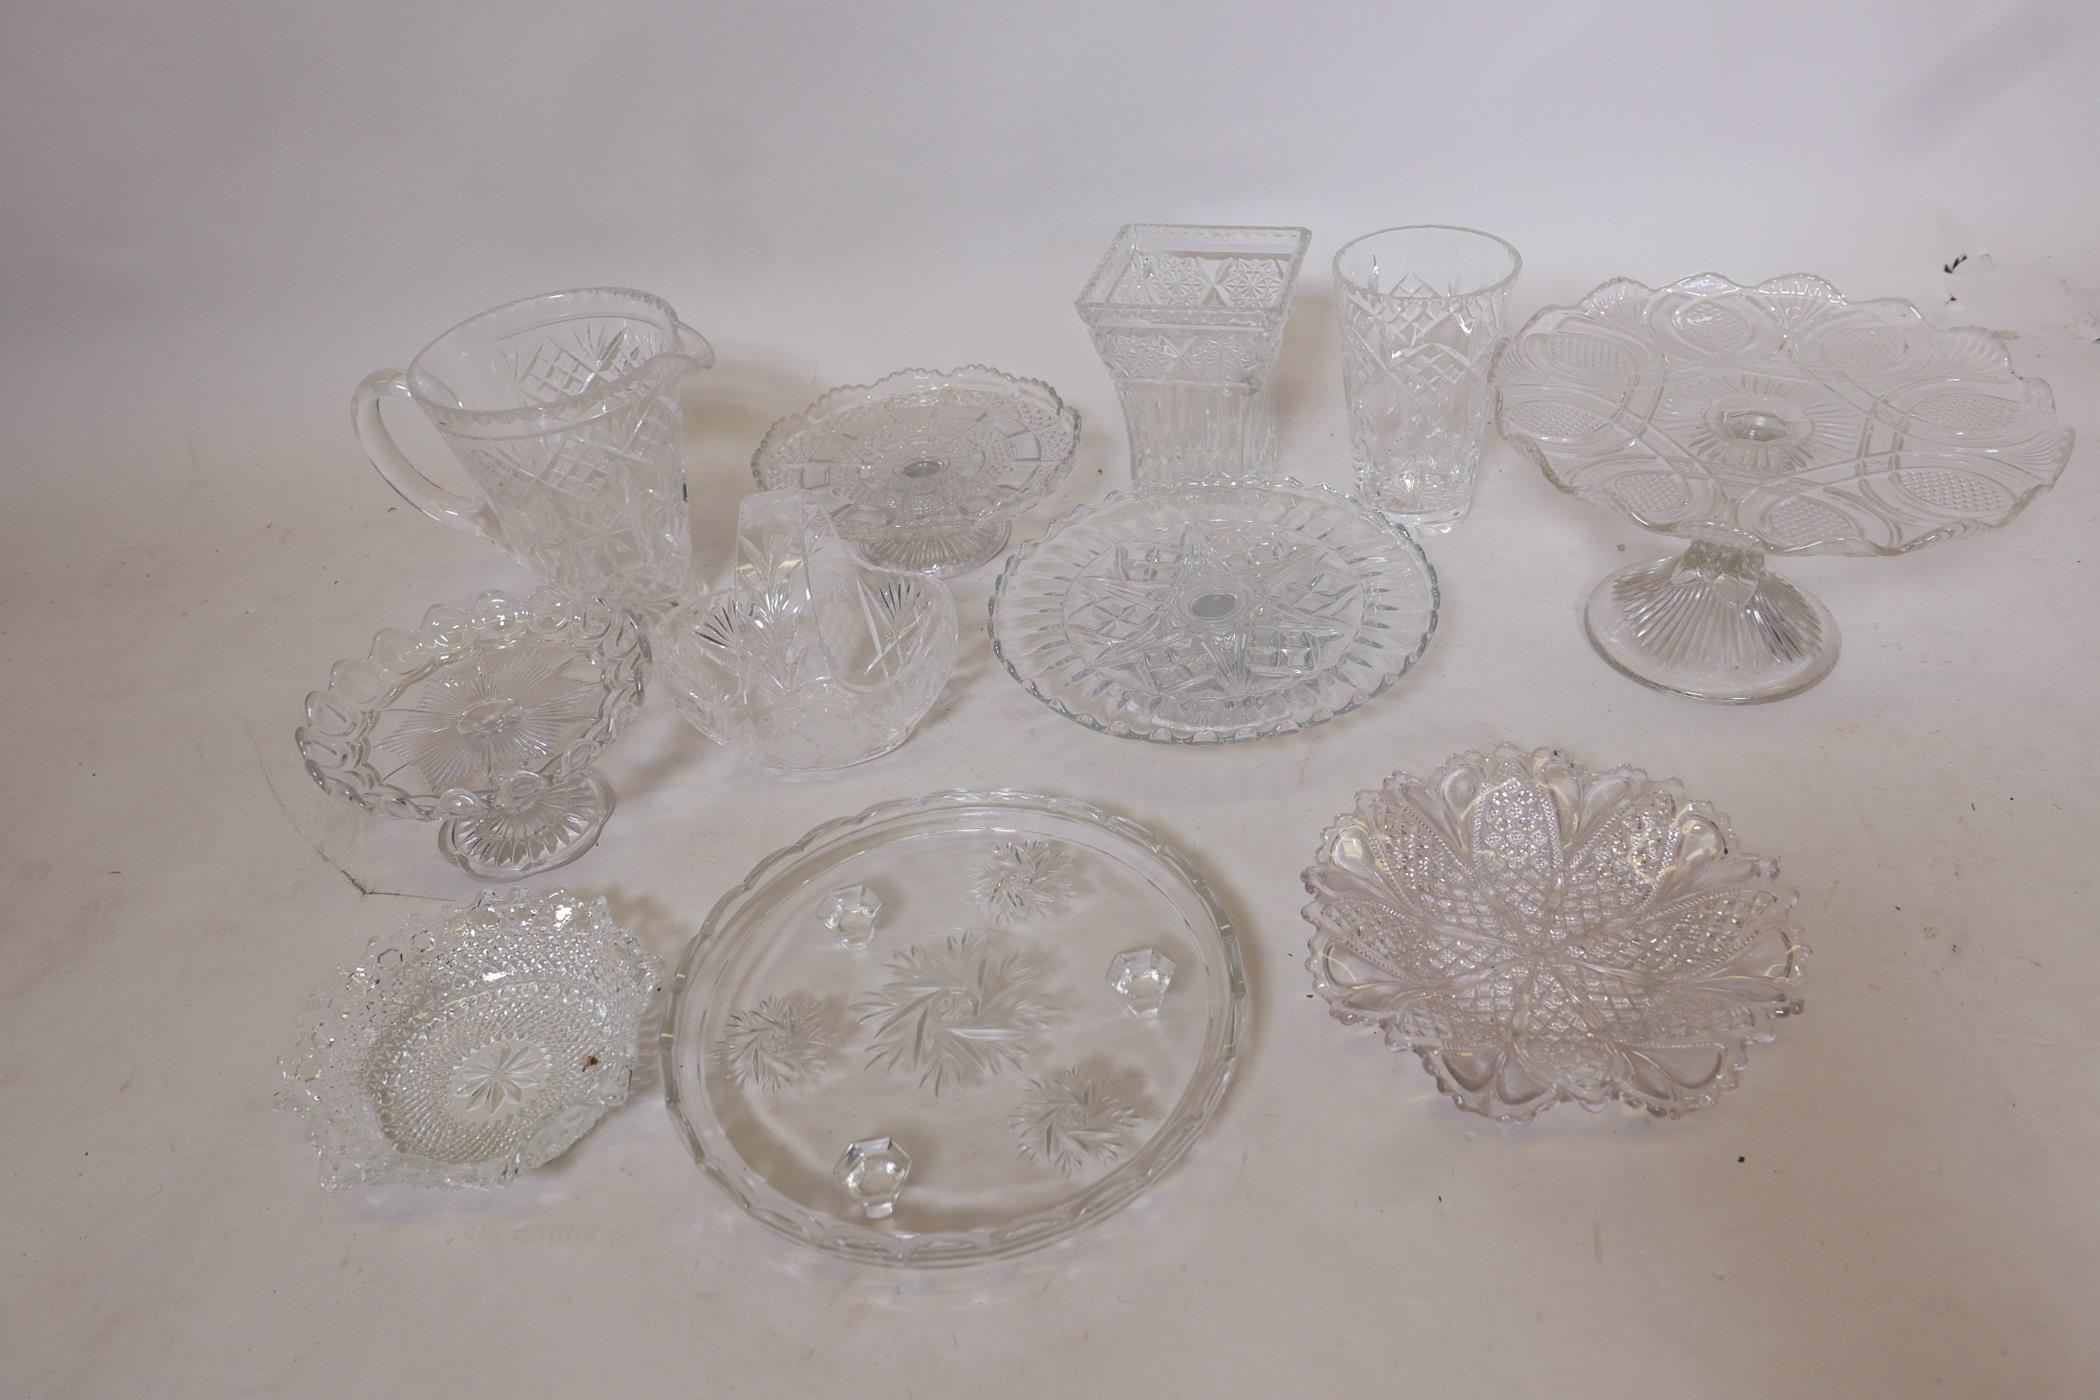 A quantity of good quality cut and pressed glassware including a small Bohemian crystal basket, a